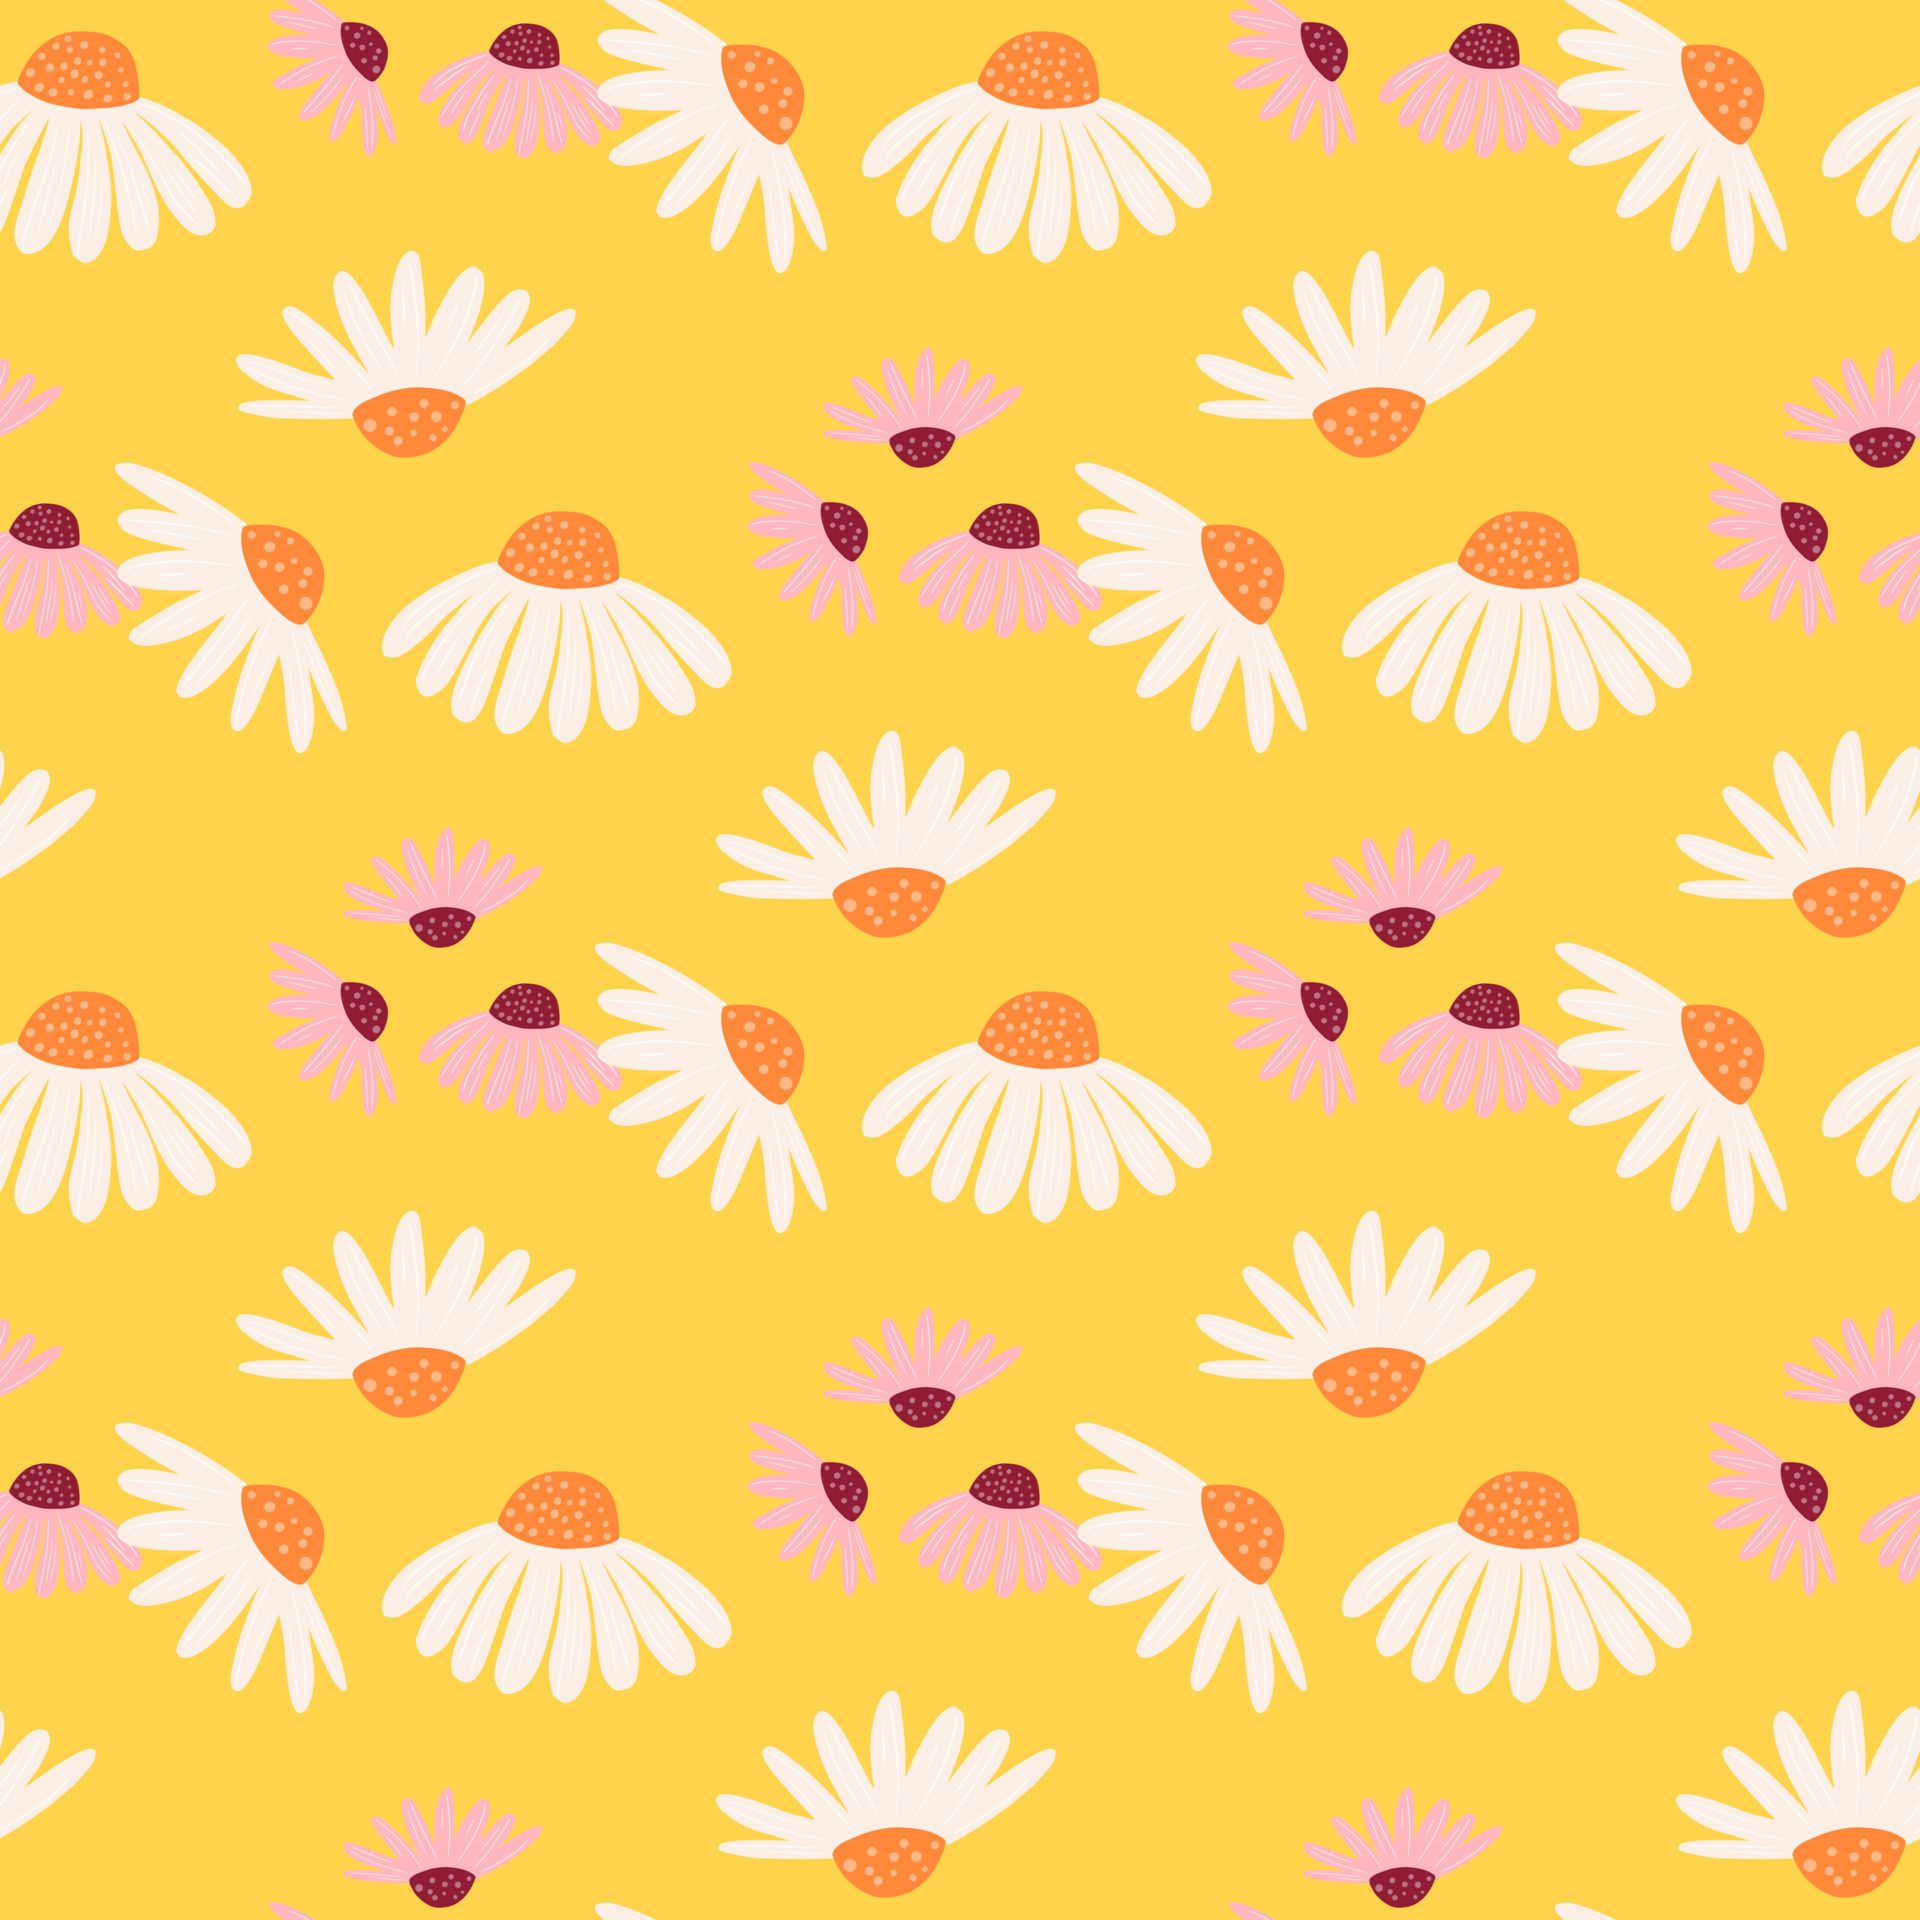 A yellow background with white and pink flowers - Bright